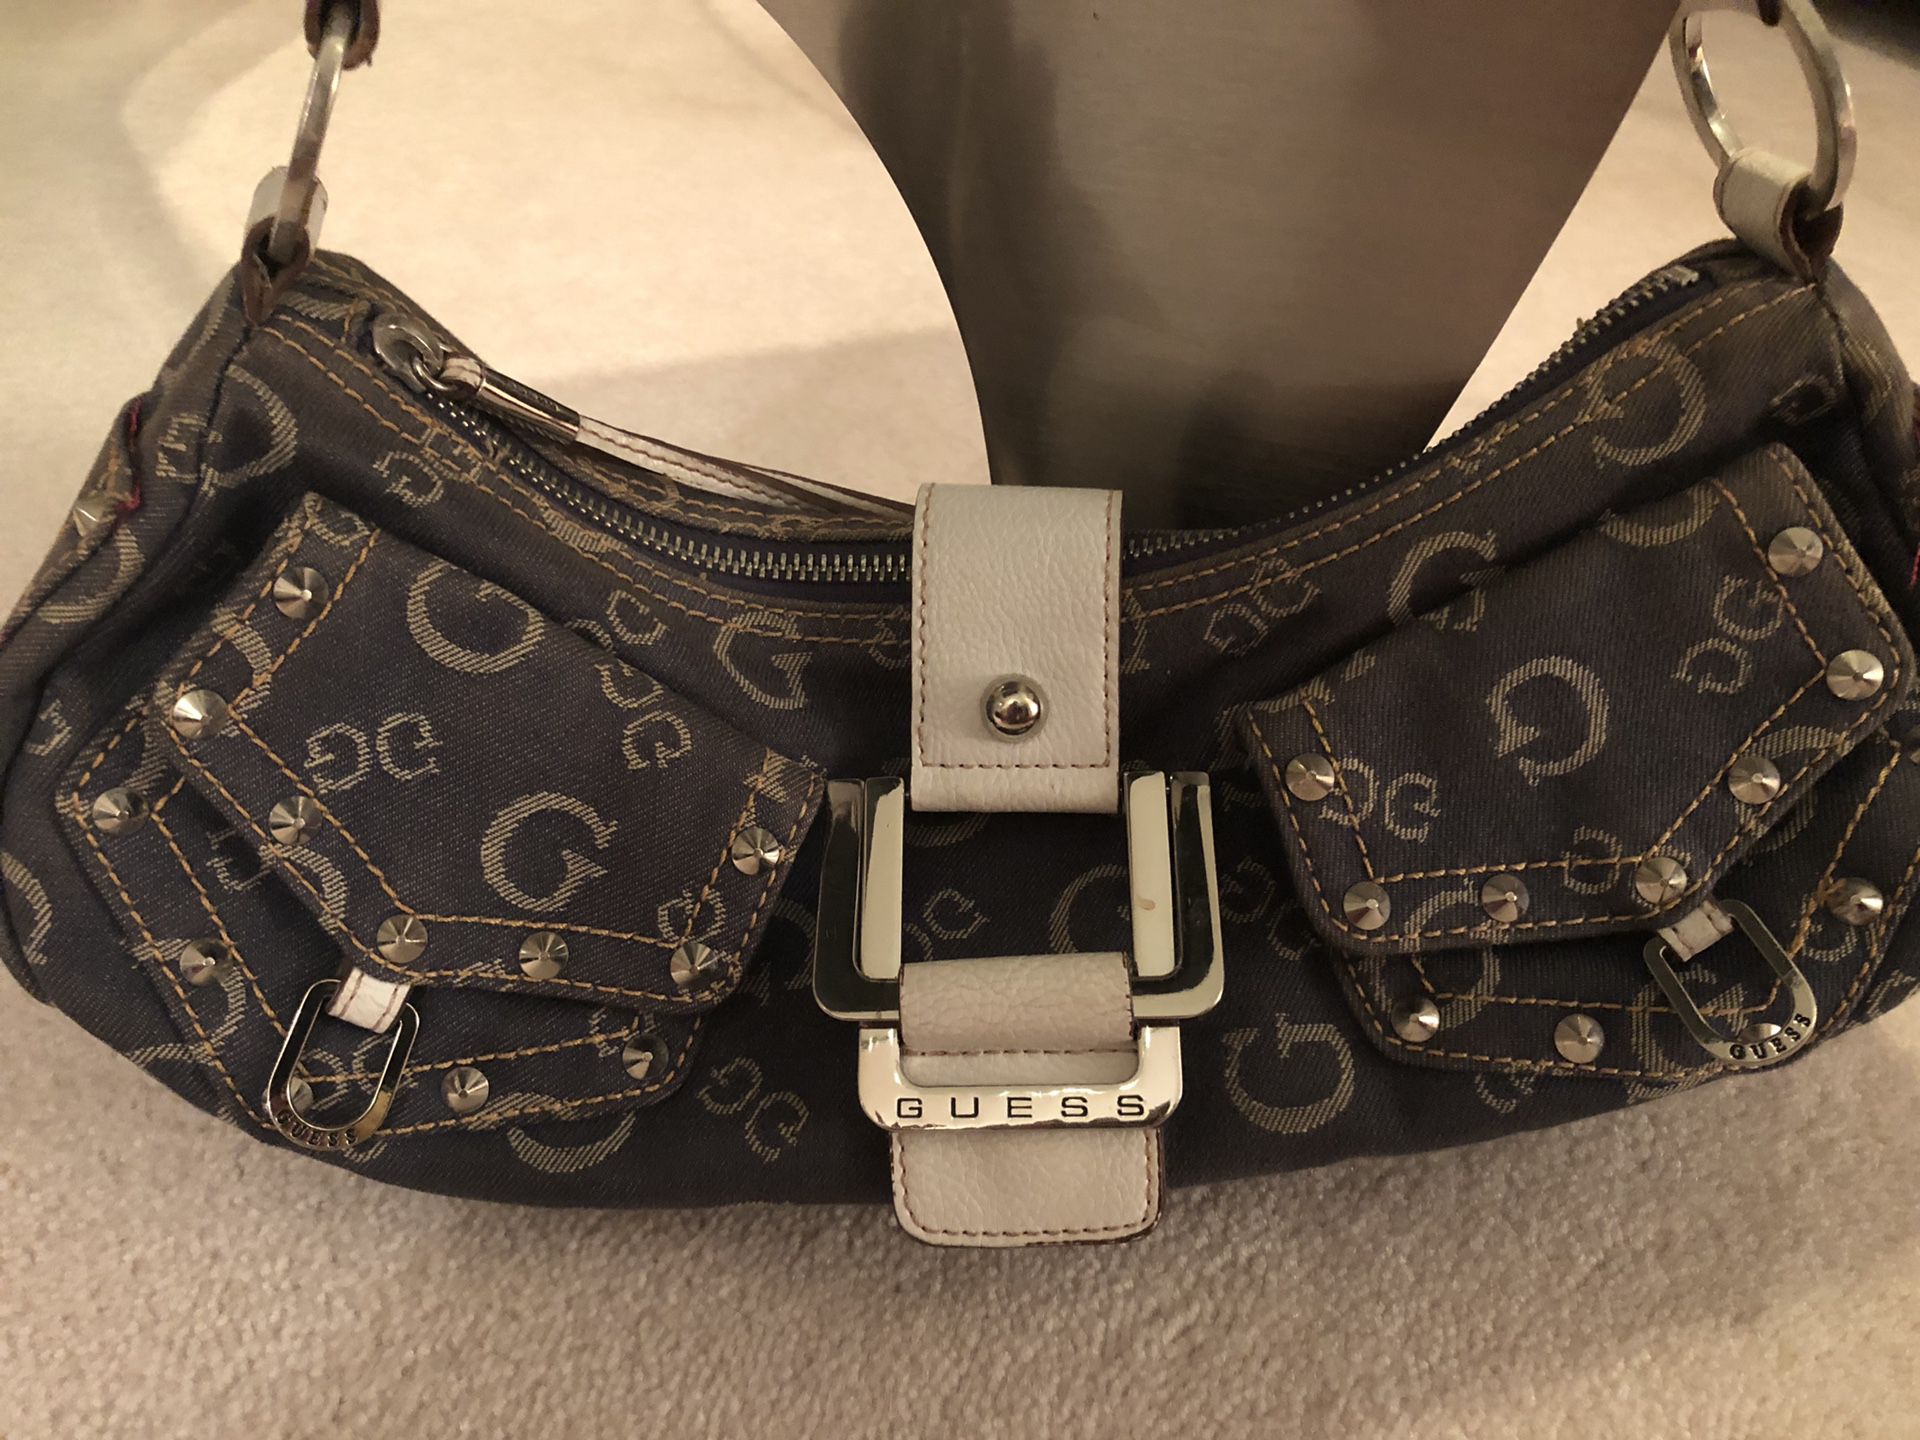 Guess denim designer purse with metal and leather details, silky interior, multiple pockets